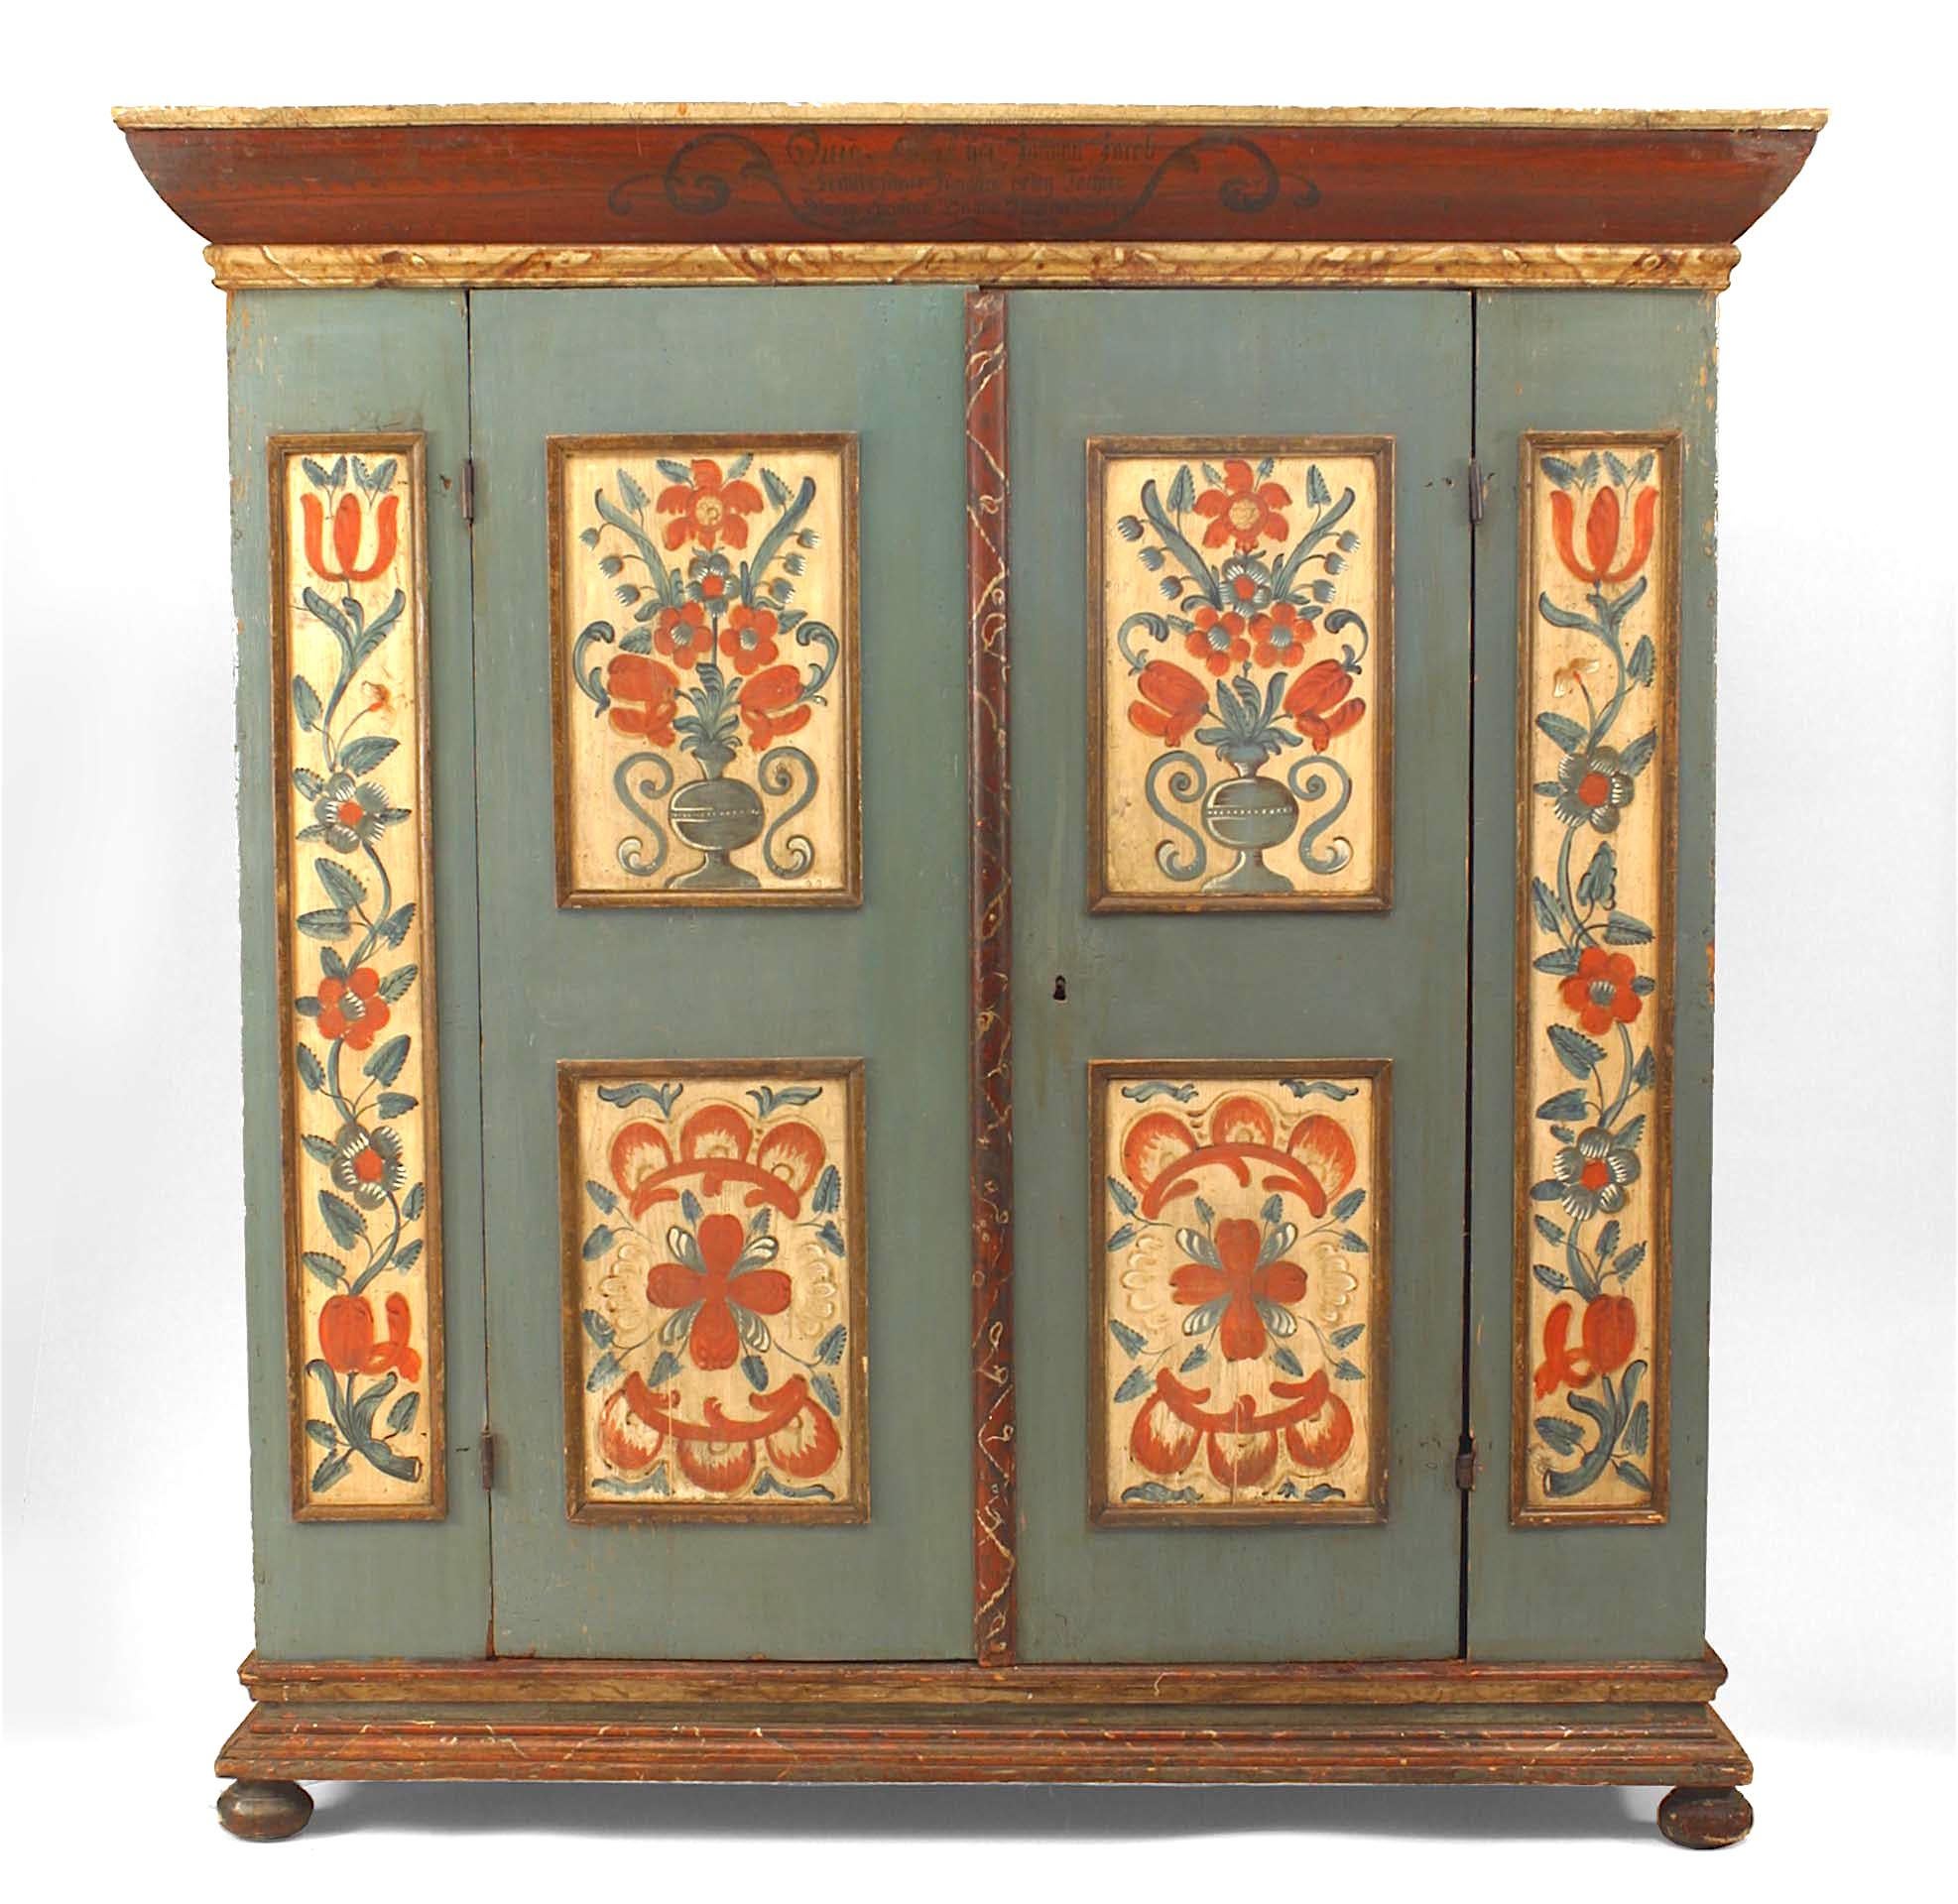 American German-Style (18th Century) blue/grey painted armoire Kas cabinet resting on bun feet with 2 large center doors and decorated with panels with a floral and vine motif
